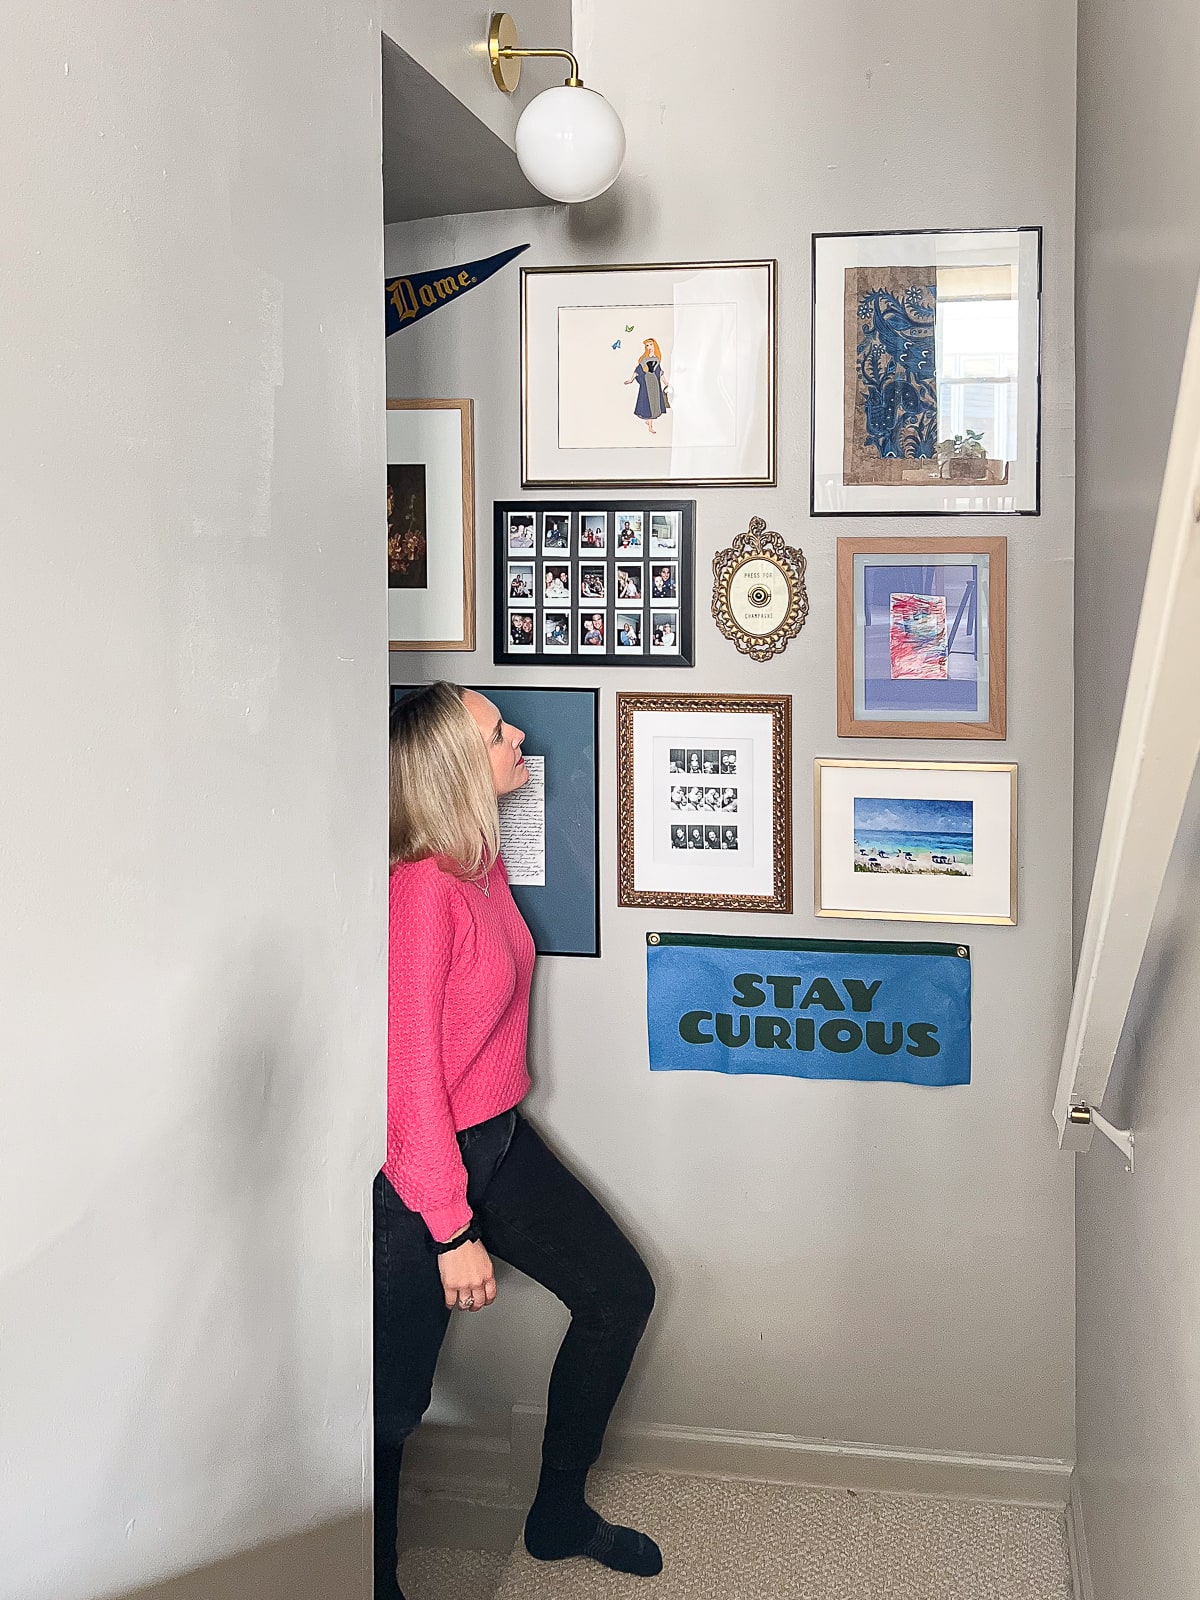 Come check out my new stairway gallery wall in our basement